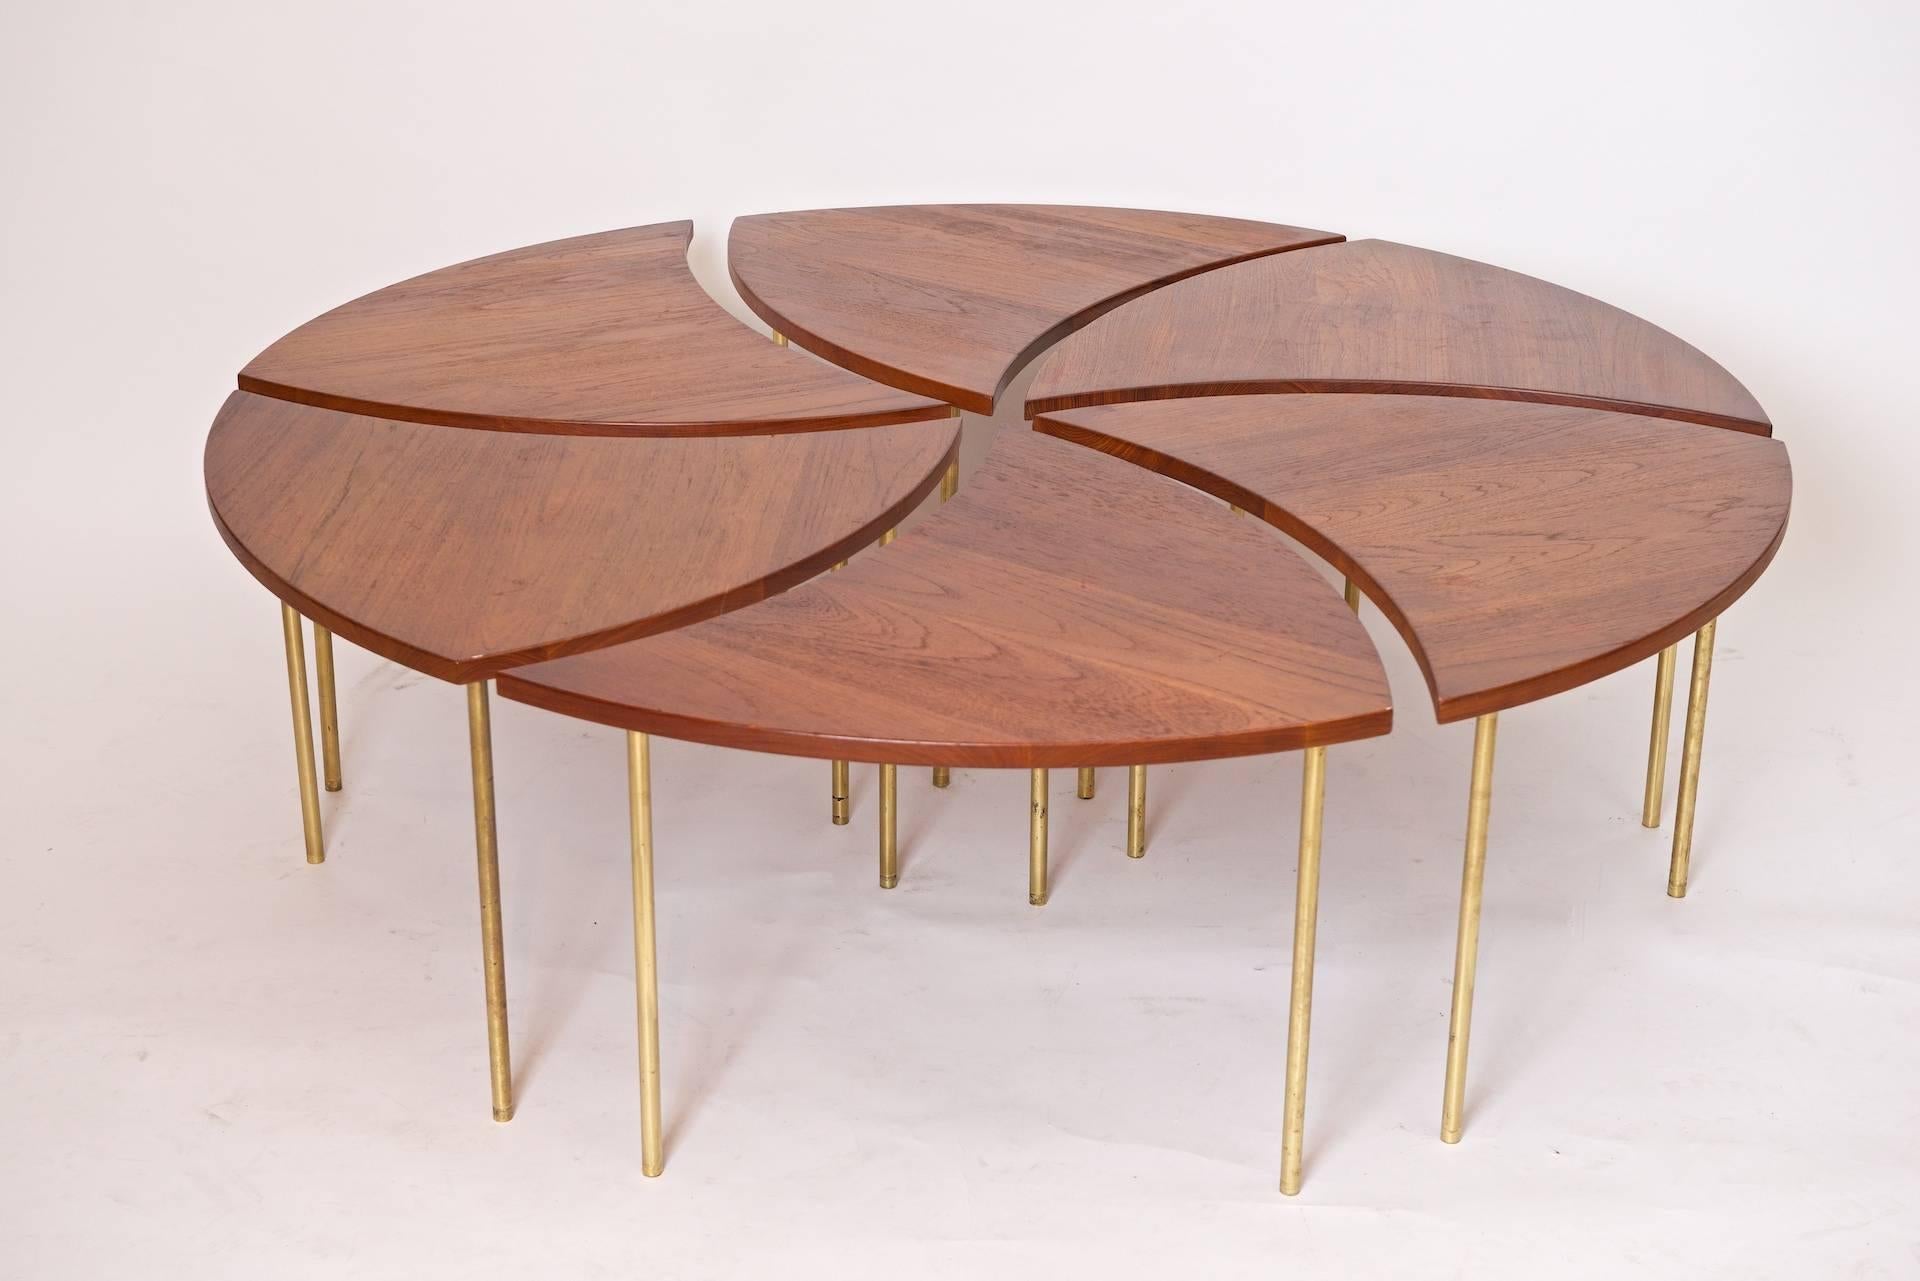 Solid teak segmented coffee table with brass legs by Peter Hvidt and Orla Mølgaard-Nielsen

Tables can be configured in several ways. Can also be stacked

France and Son. Metal Labels present on each section

